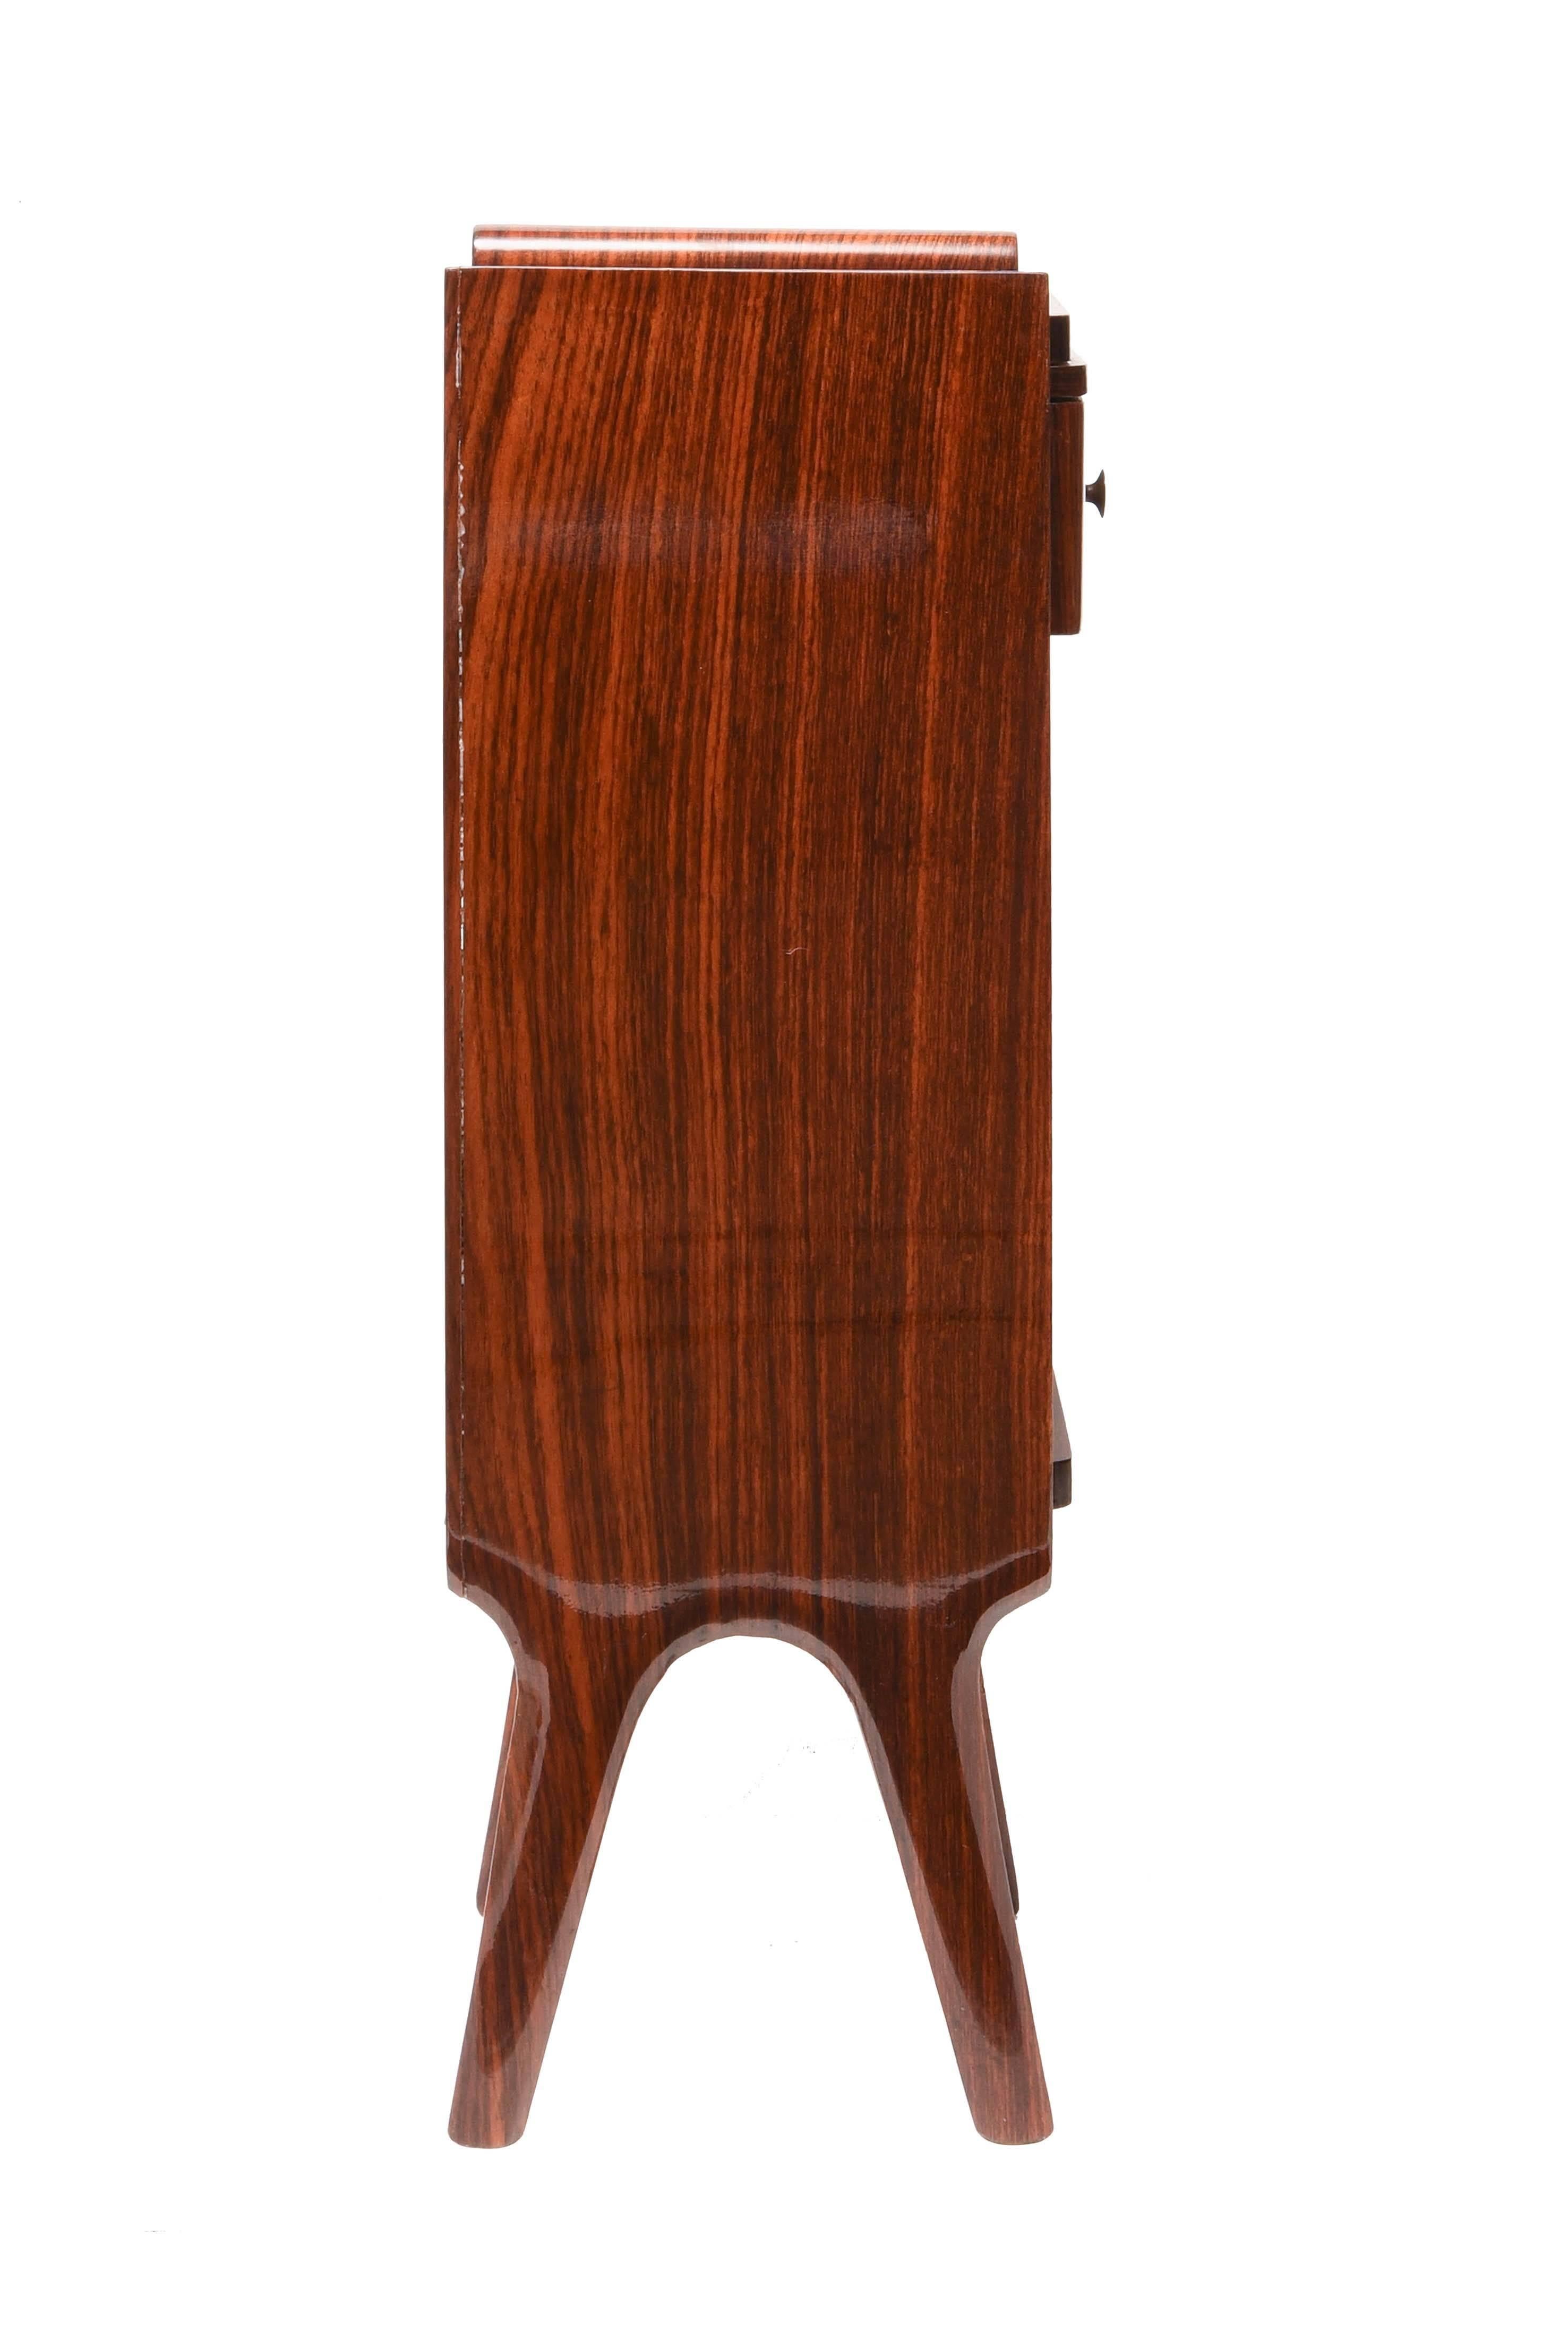 Elegant rosewood bedside attributed to Ico Parisi.